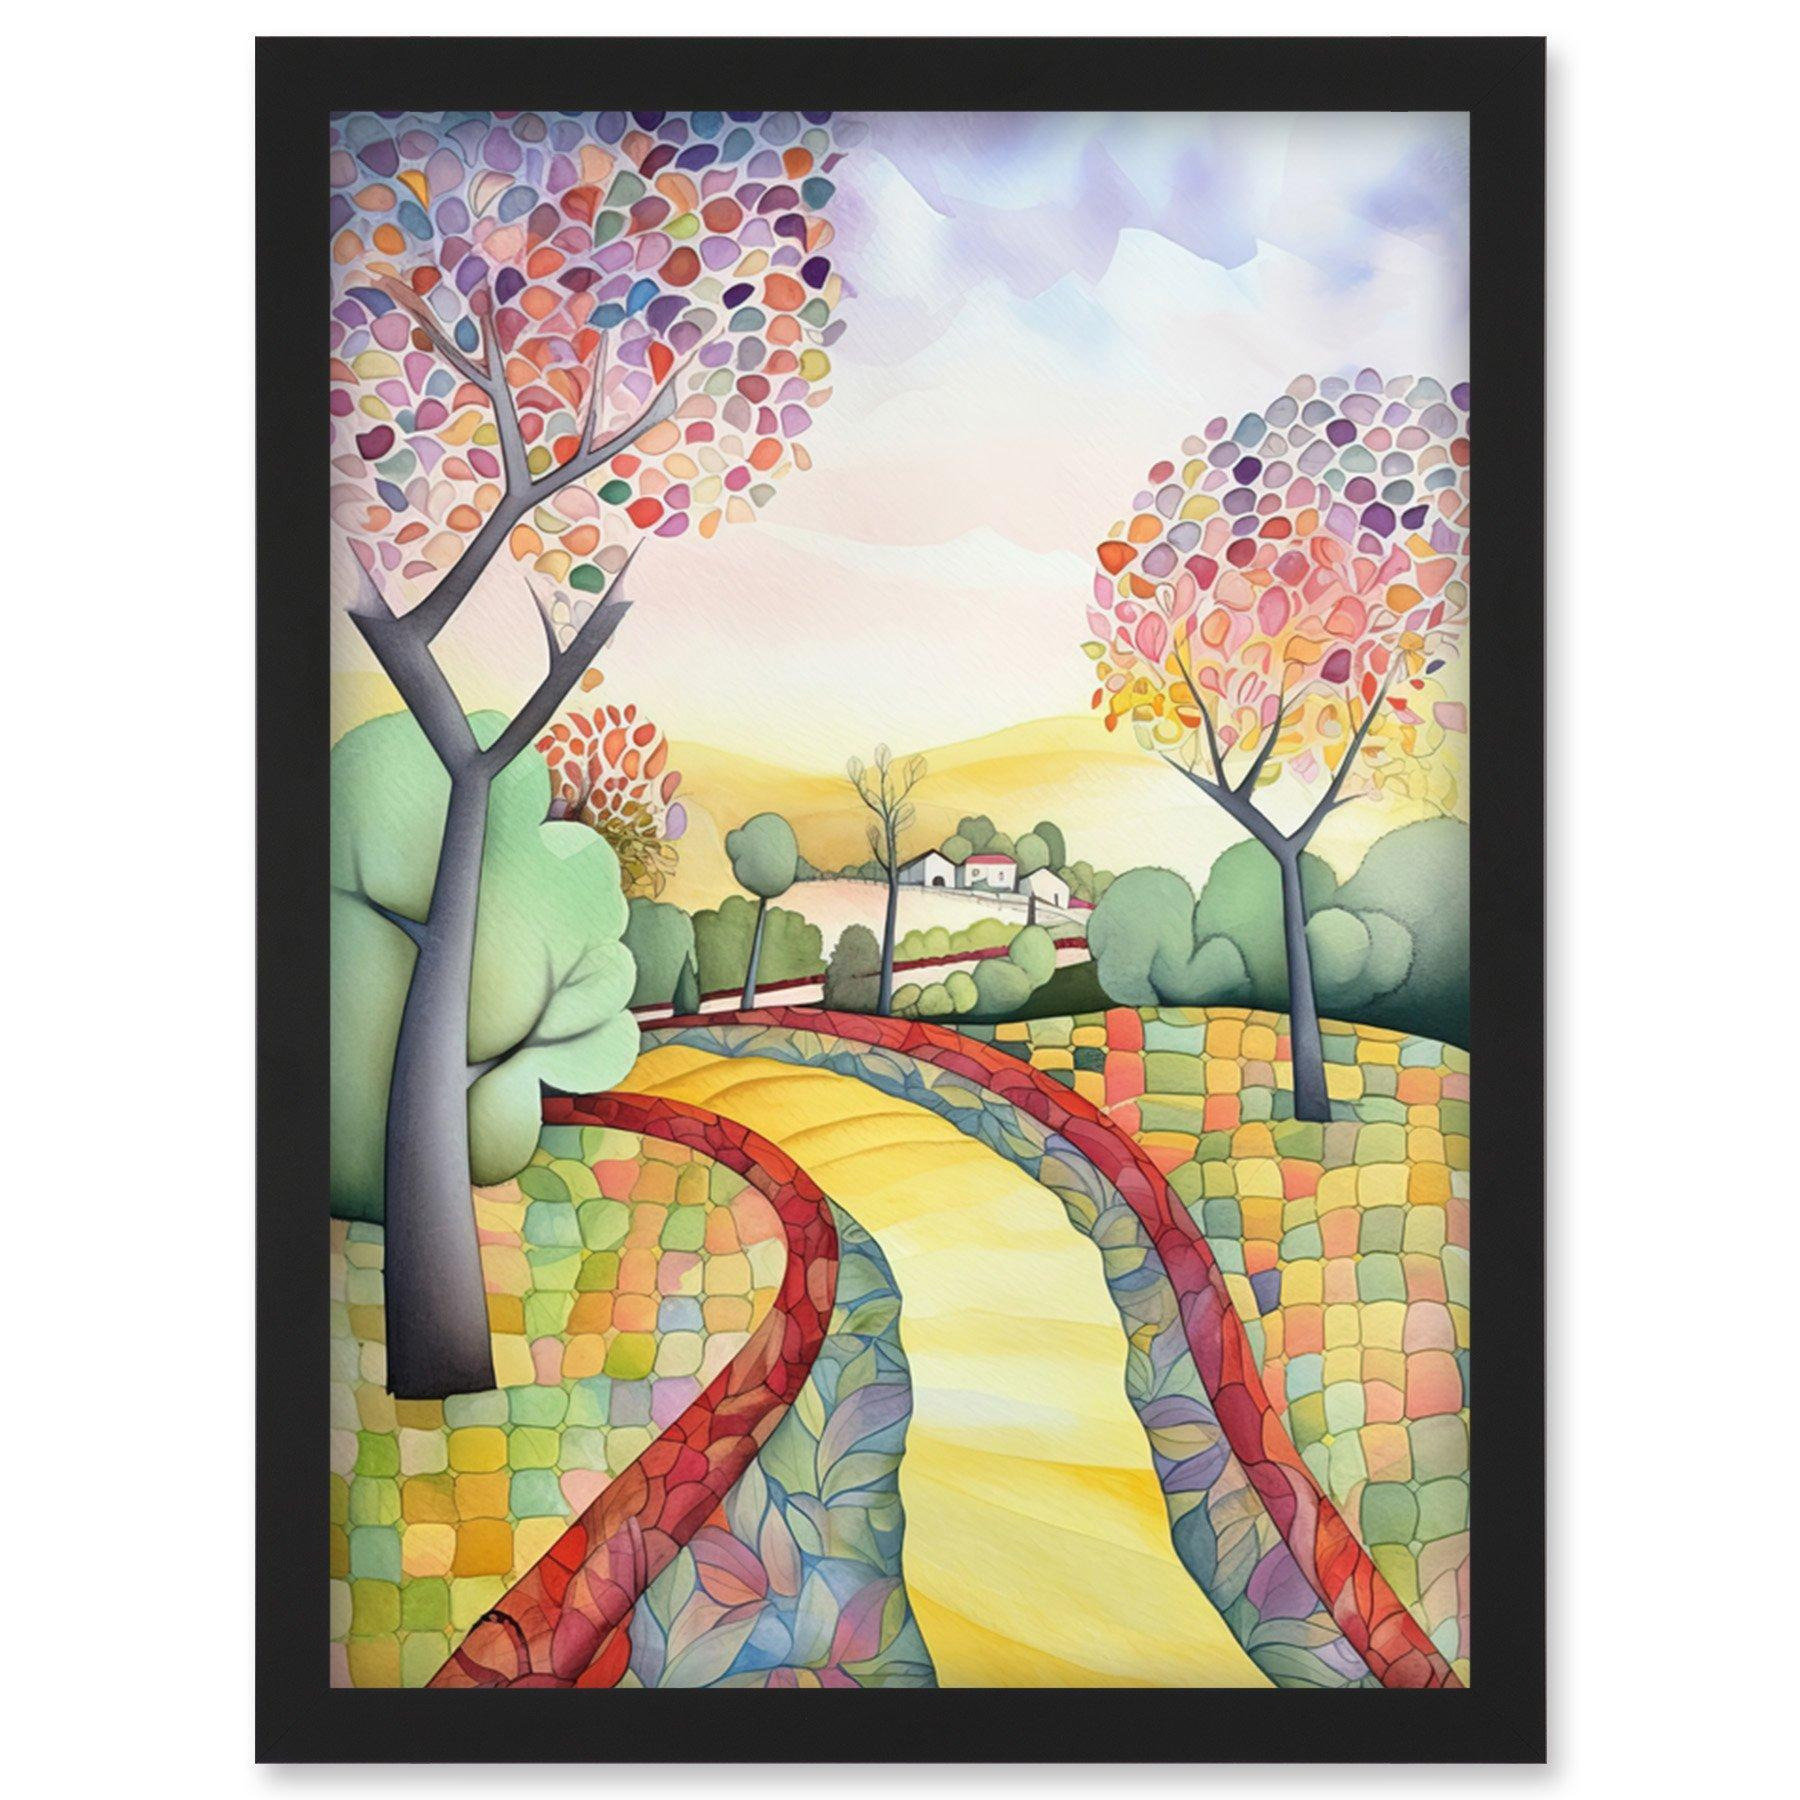 Countryside Path In Autumn Folk Art Landscape Pastel Watercolour Painting Artwork Framed Wall Art Print A4 - image 1